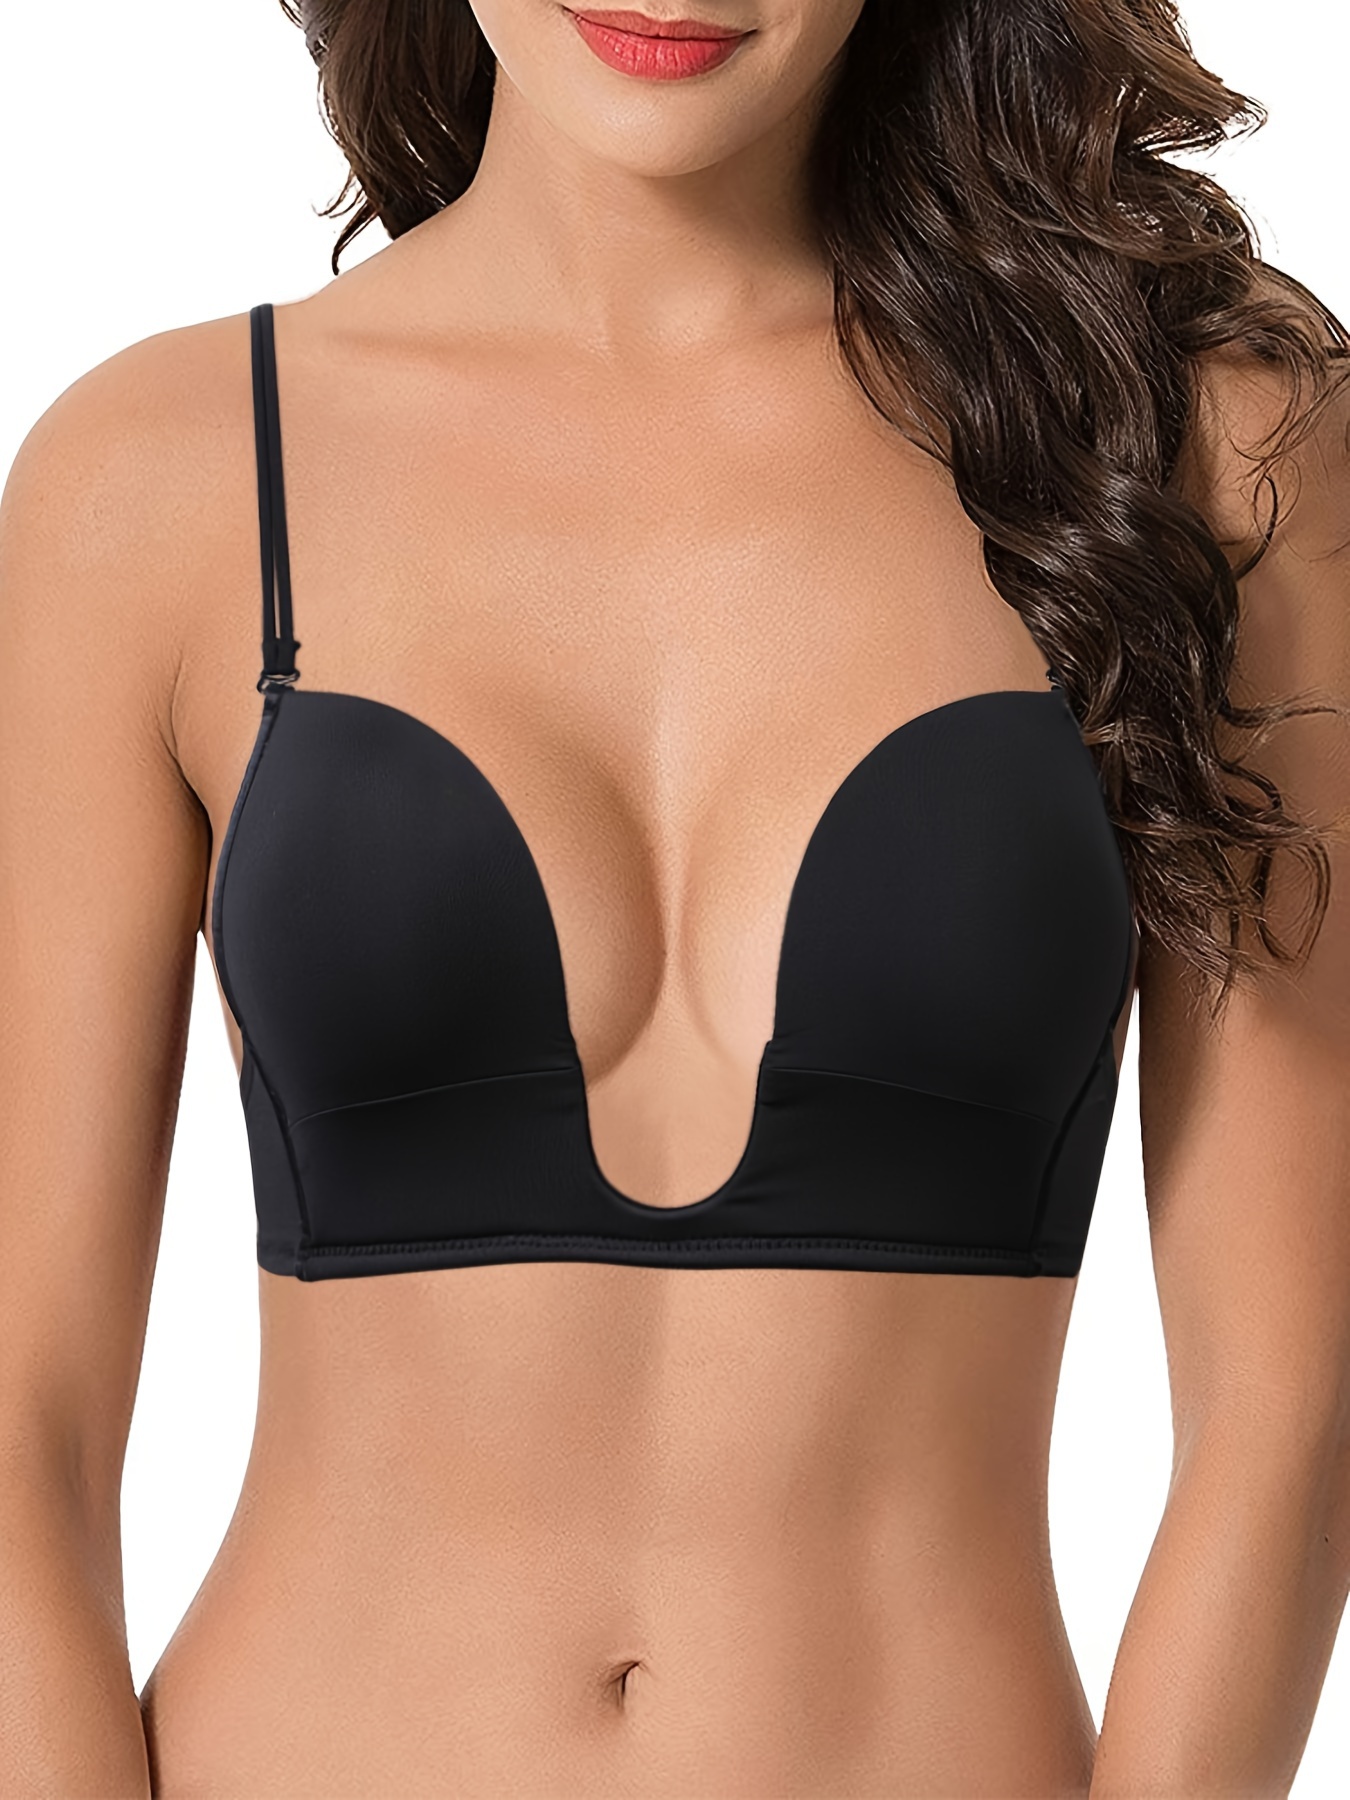 Push up Bra Sexy Lingerie for Women Women's Solid Bra Wire Free